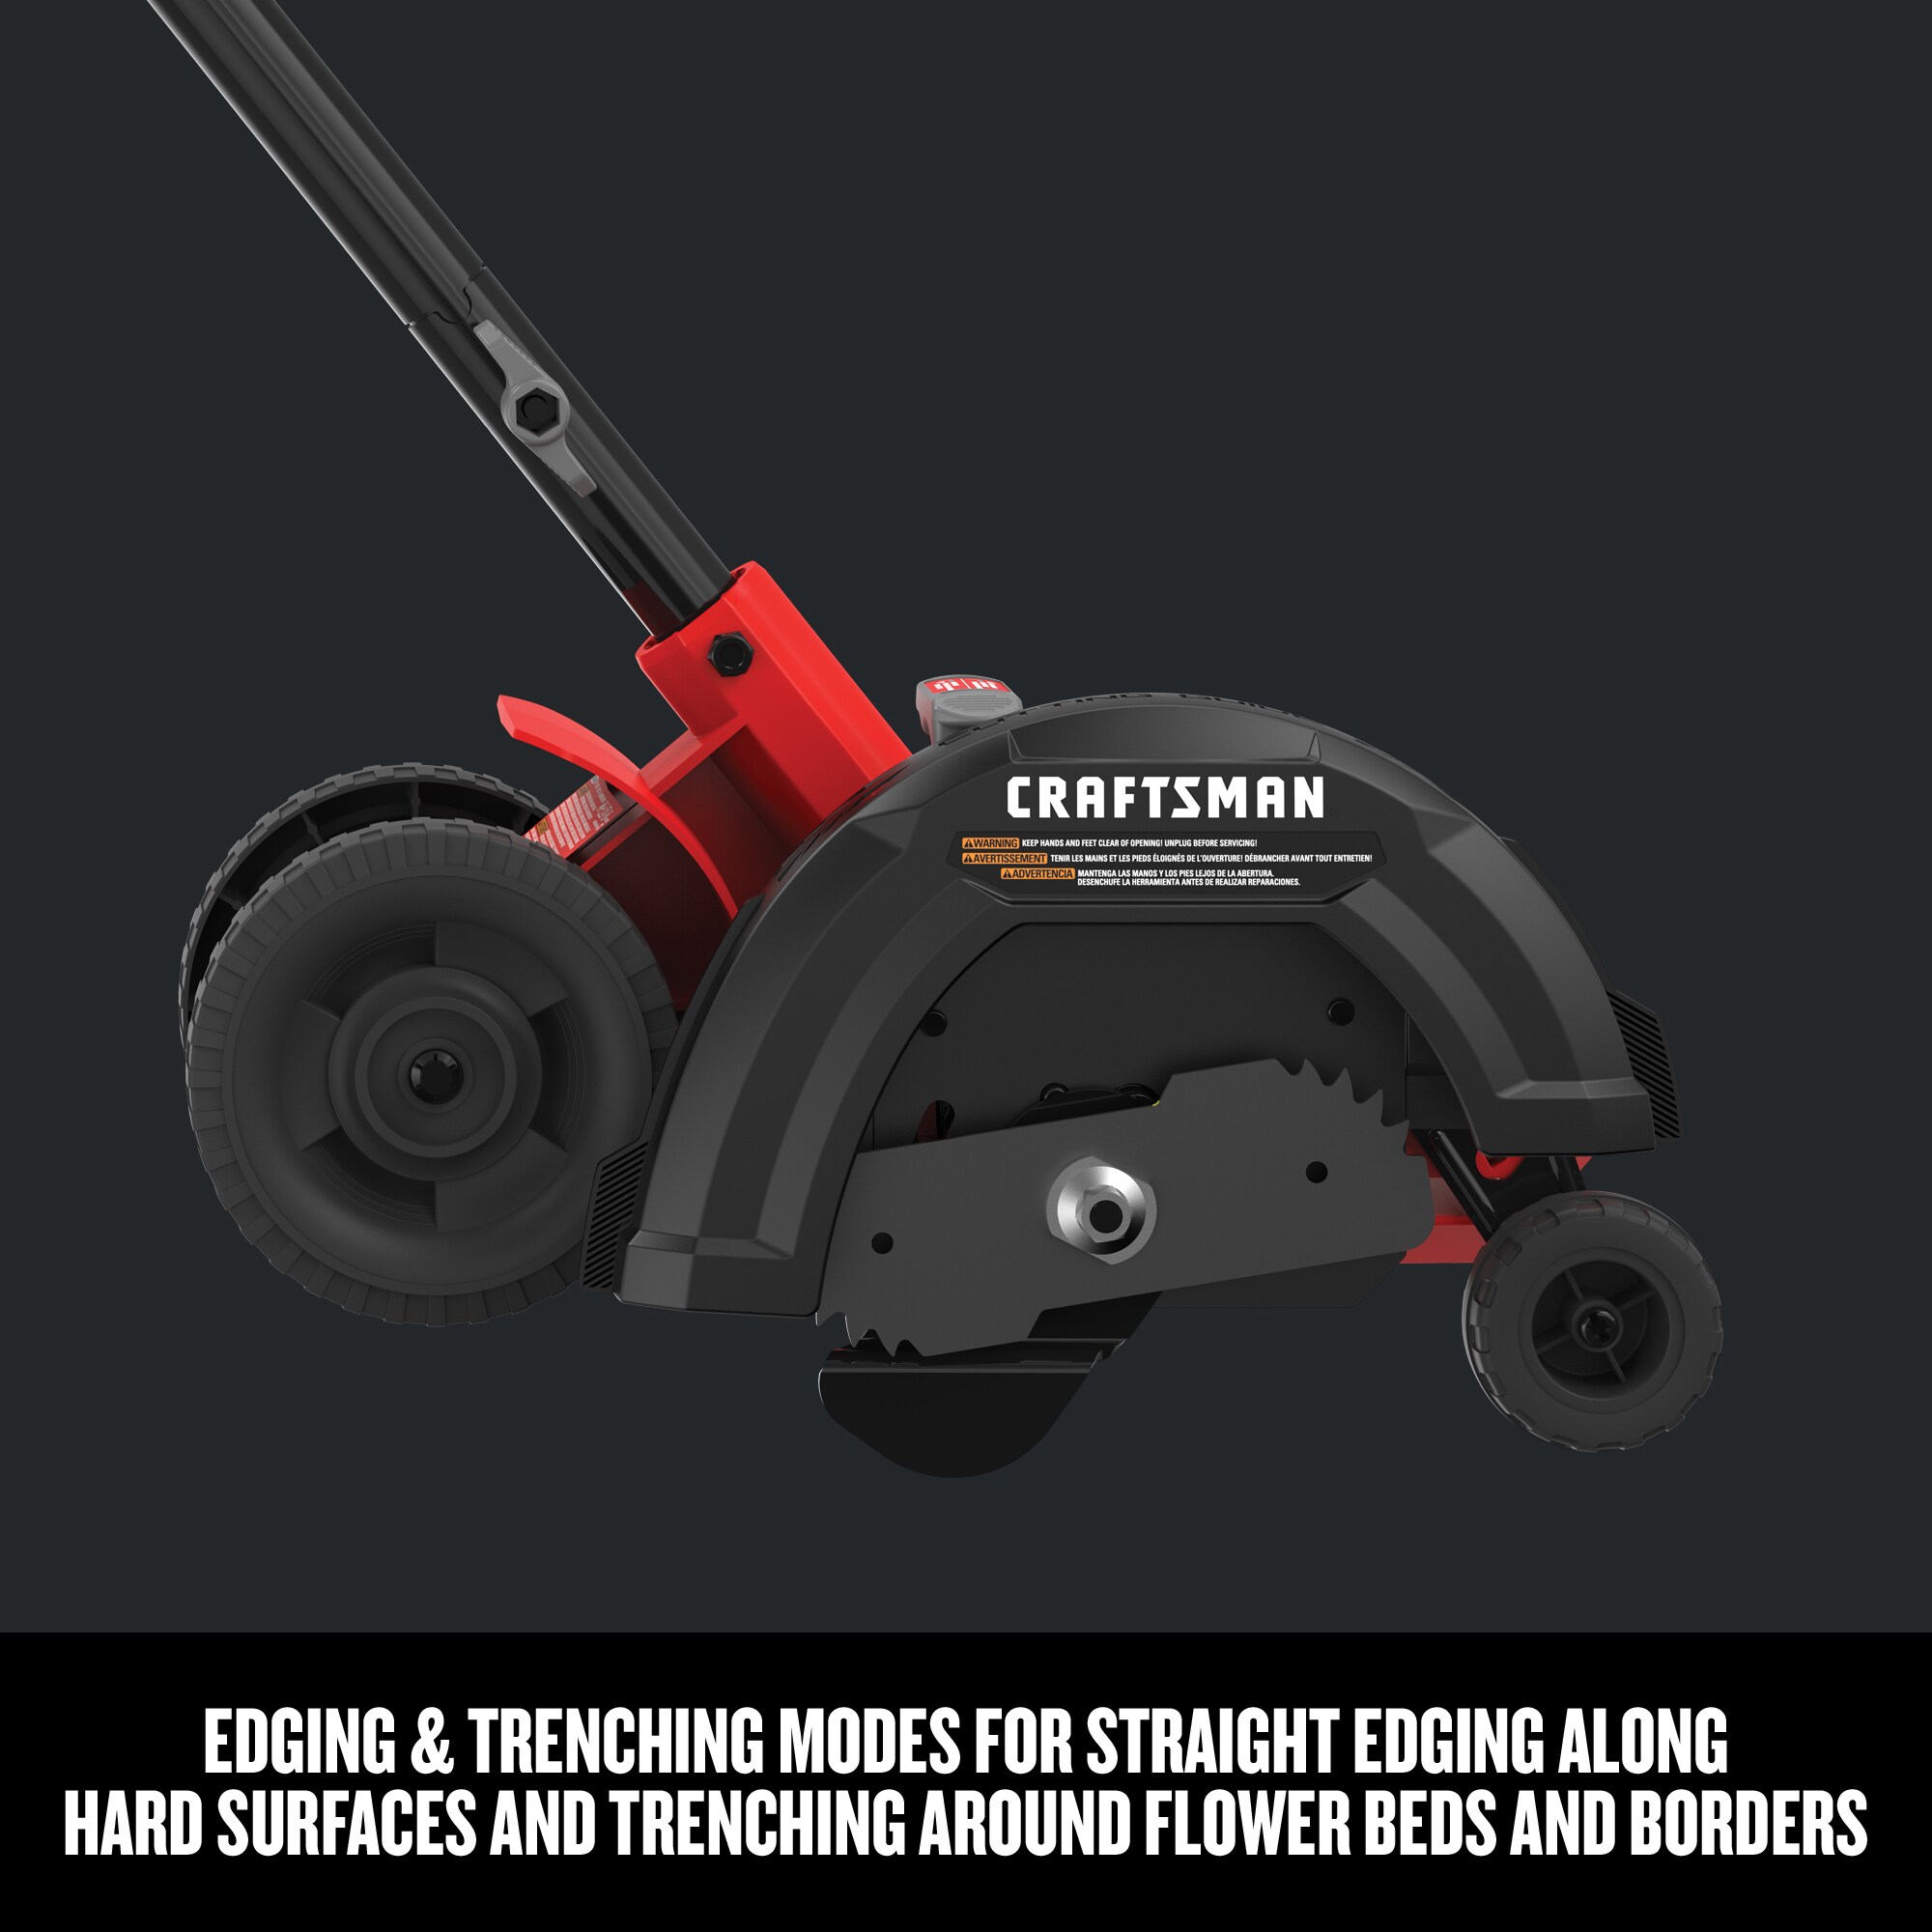 https://discounttoday.net/wp-content/uploads/2022/09/CRAFTSMAN-CMEED400-7.5-in-Push-Walk-Behind-Electric-Lawn-Edger2.jpg